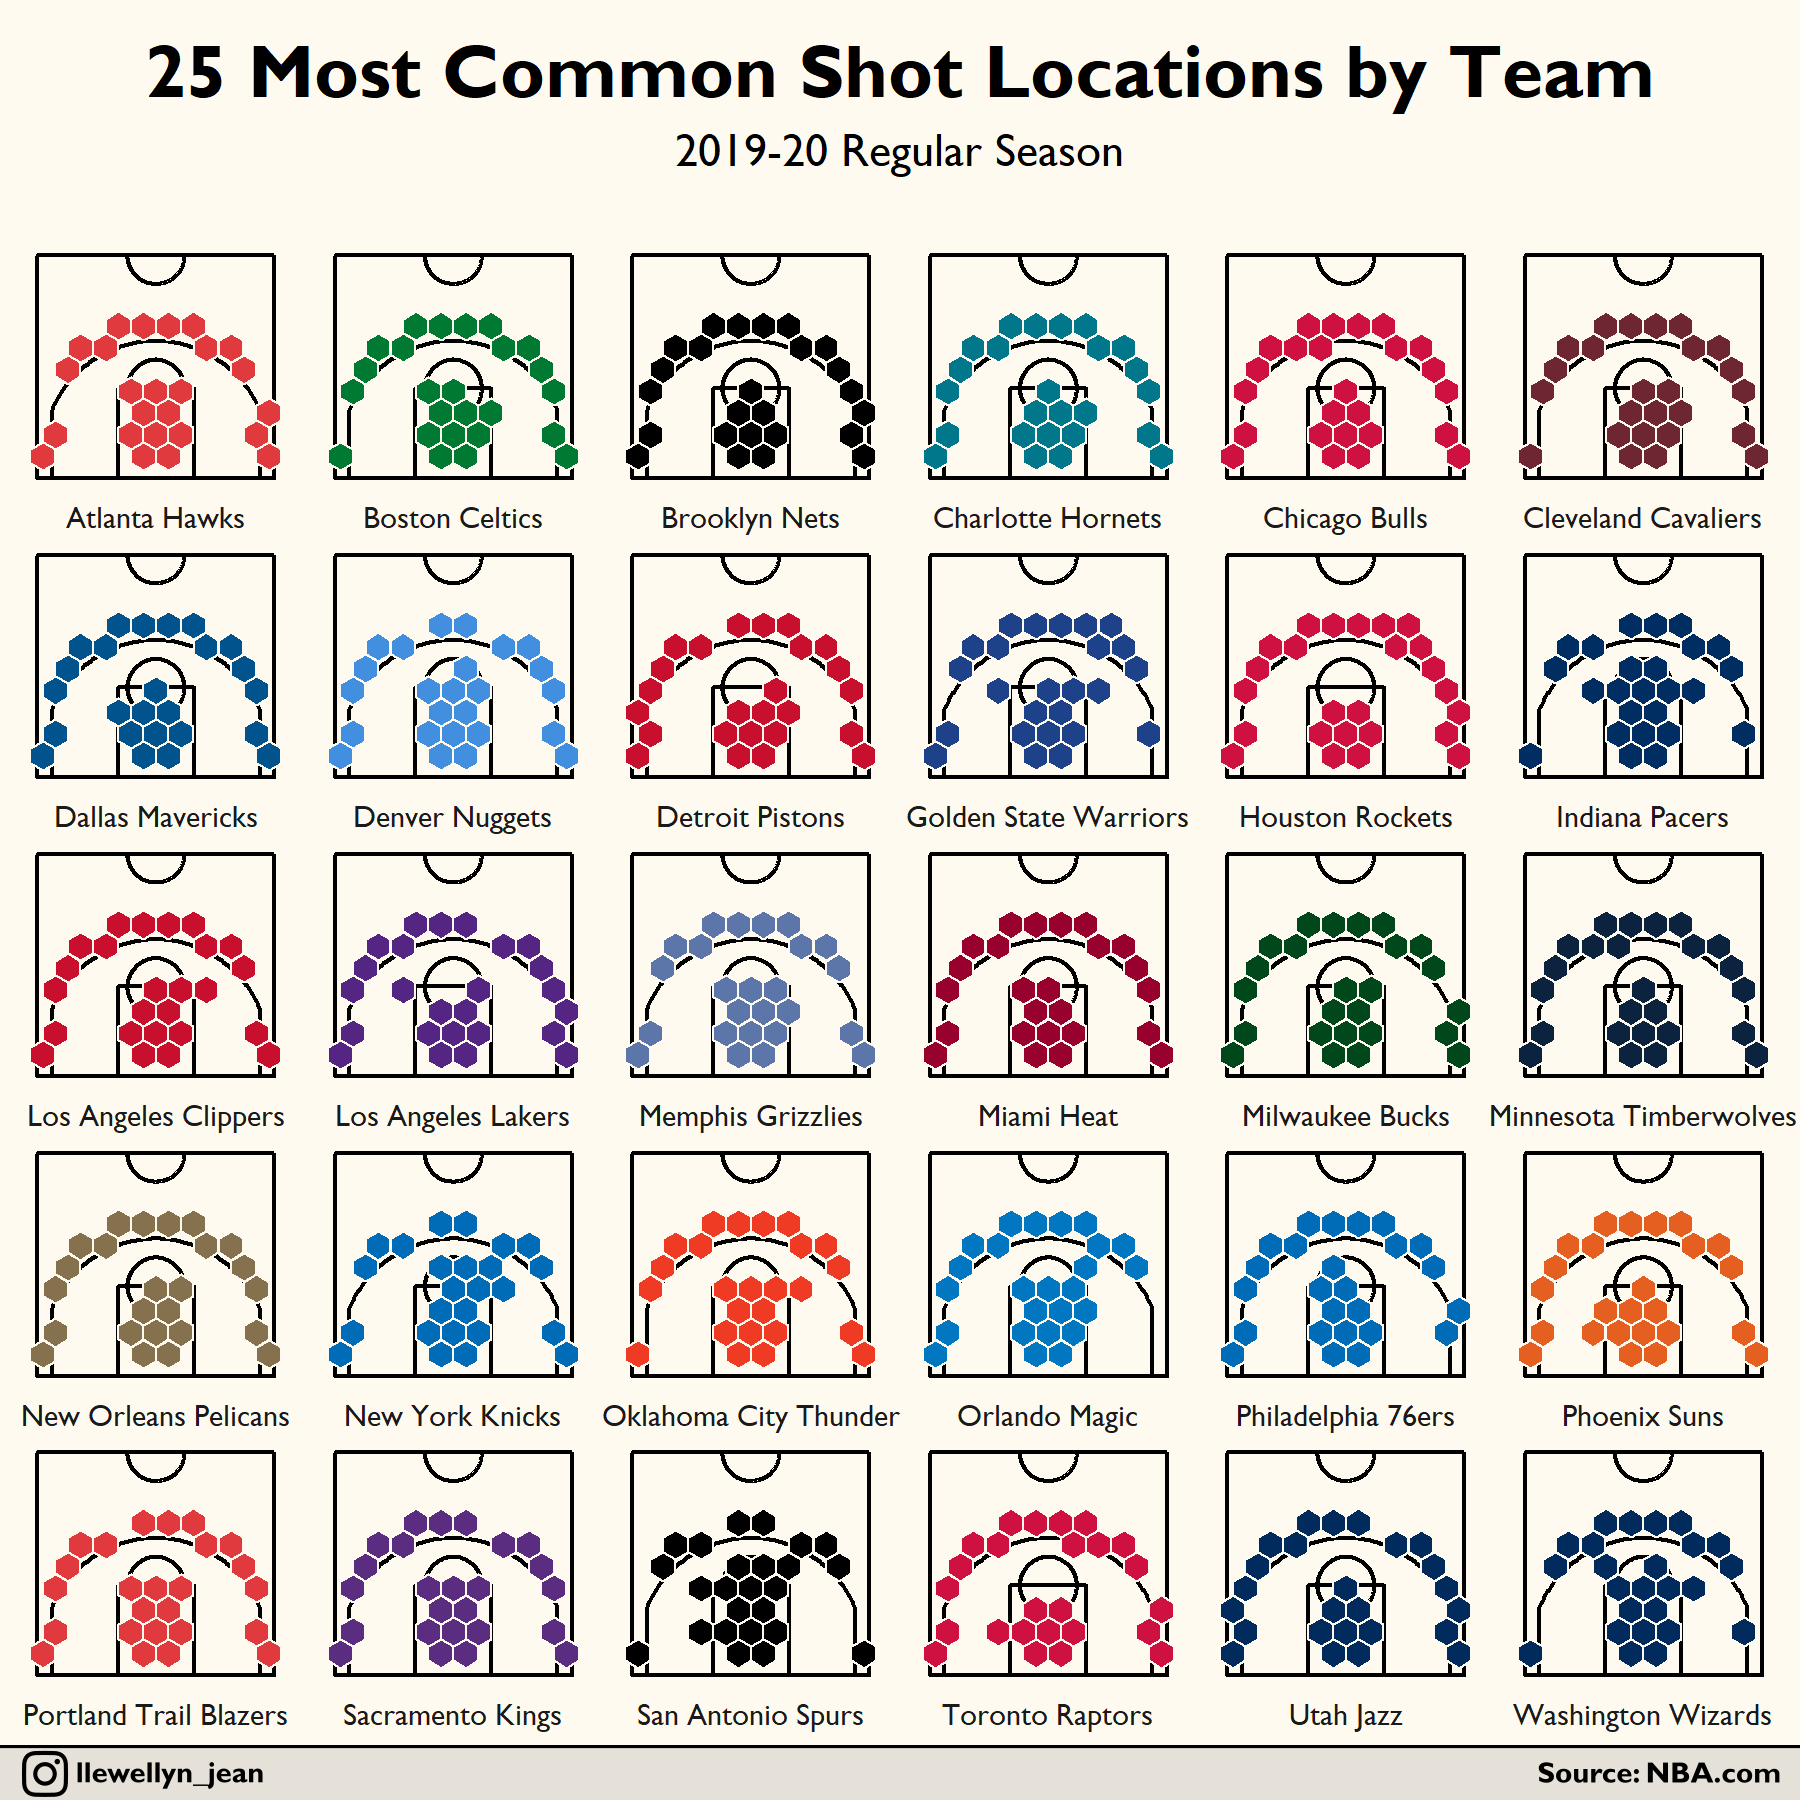 19-20 most common shot location by team